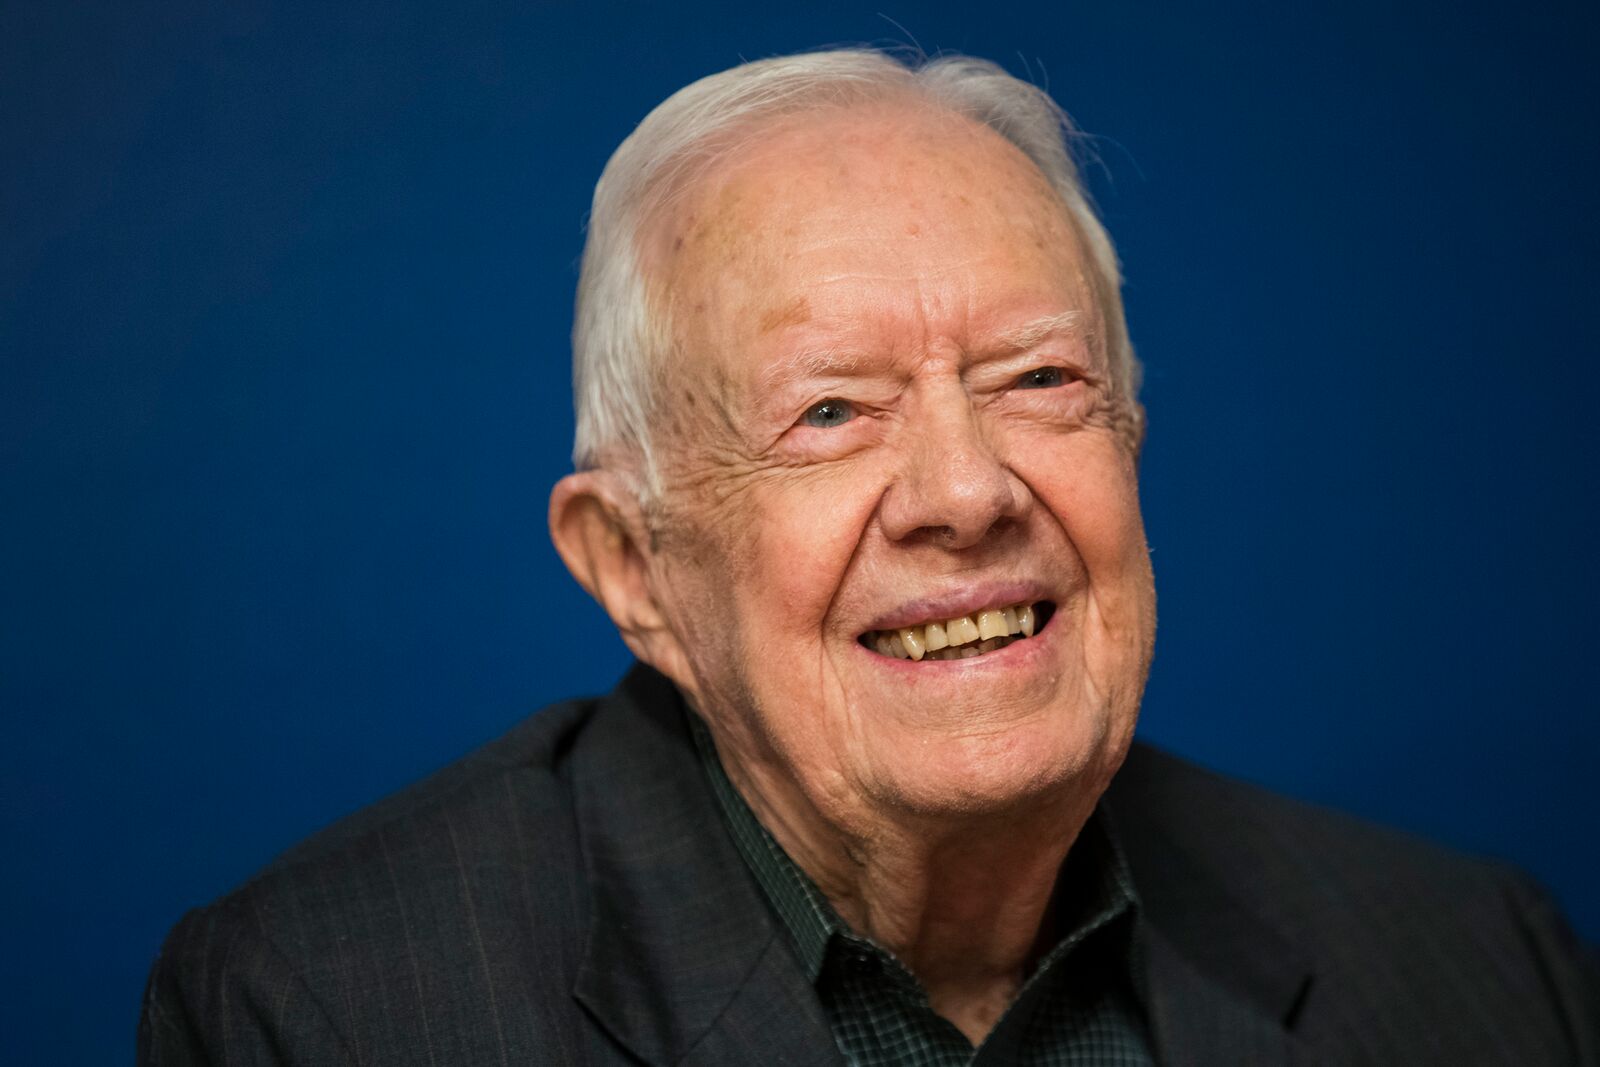  Former U.S. President Jimmy Carter smiles during a book signing event for his new book 'Faith: A Journey For All' at Barnes & Noble bookstore in Midtown Manhattan, March 26, 2018 in New York City | Photo: Getty Images